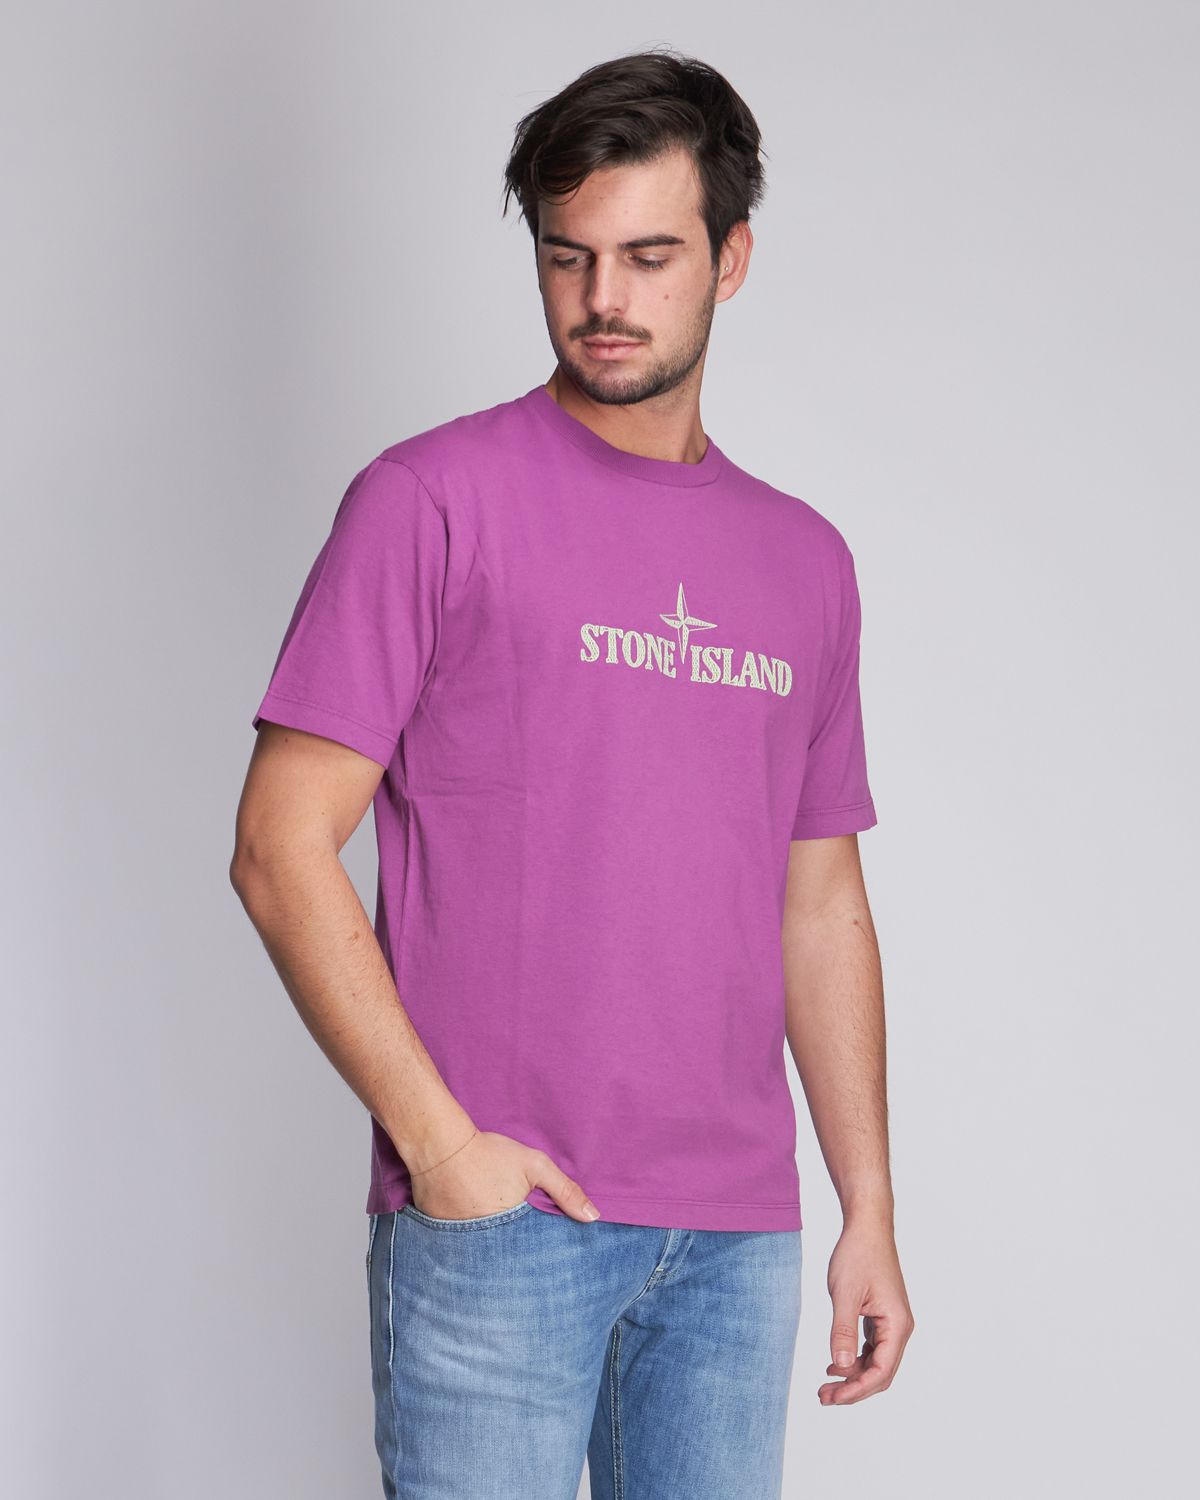 T shirt stiched two magenta